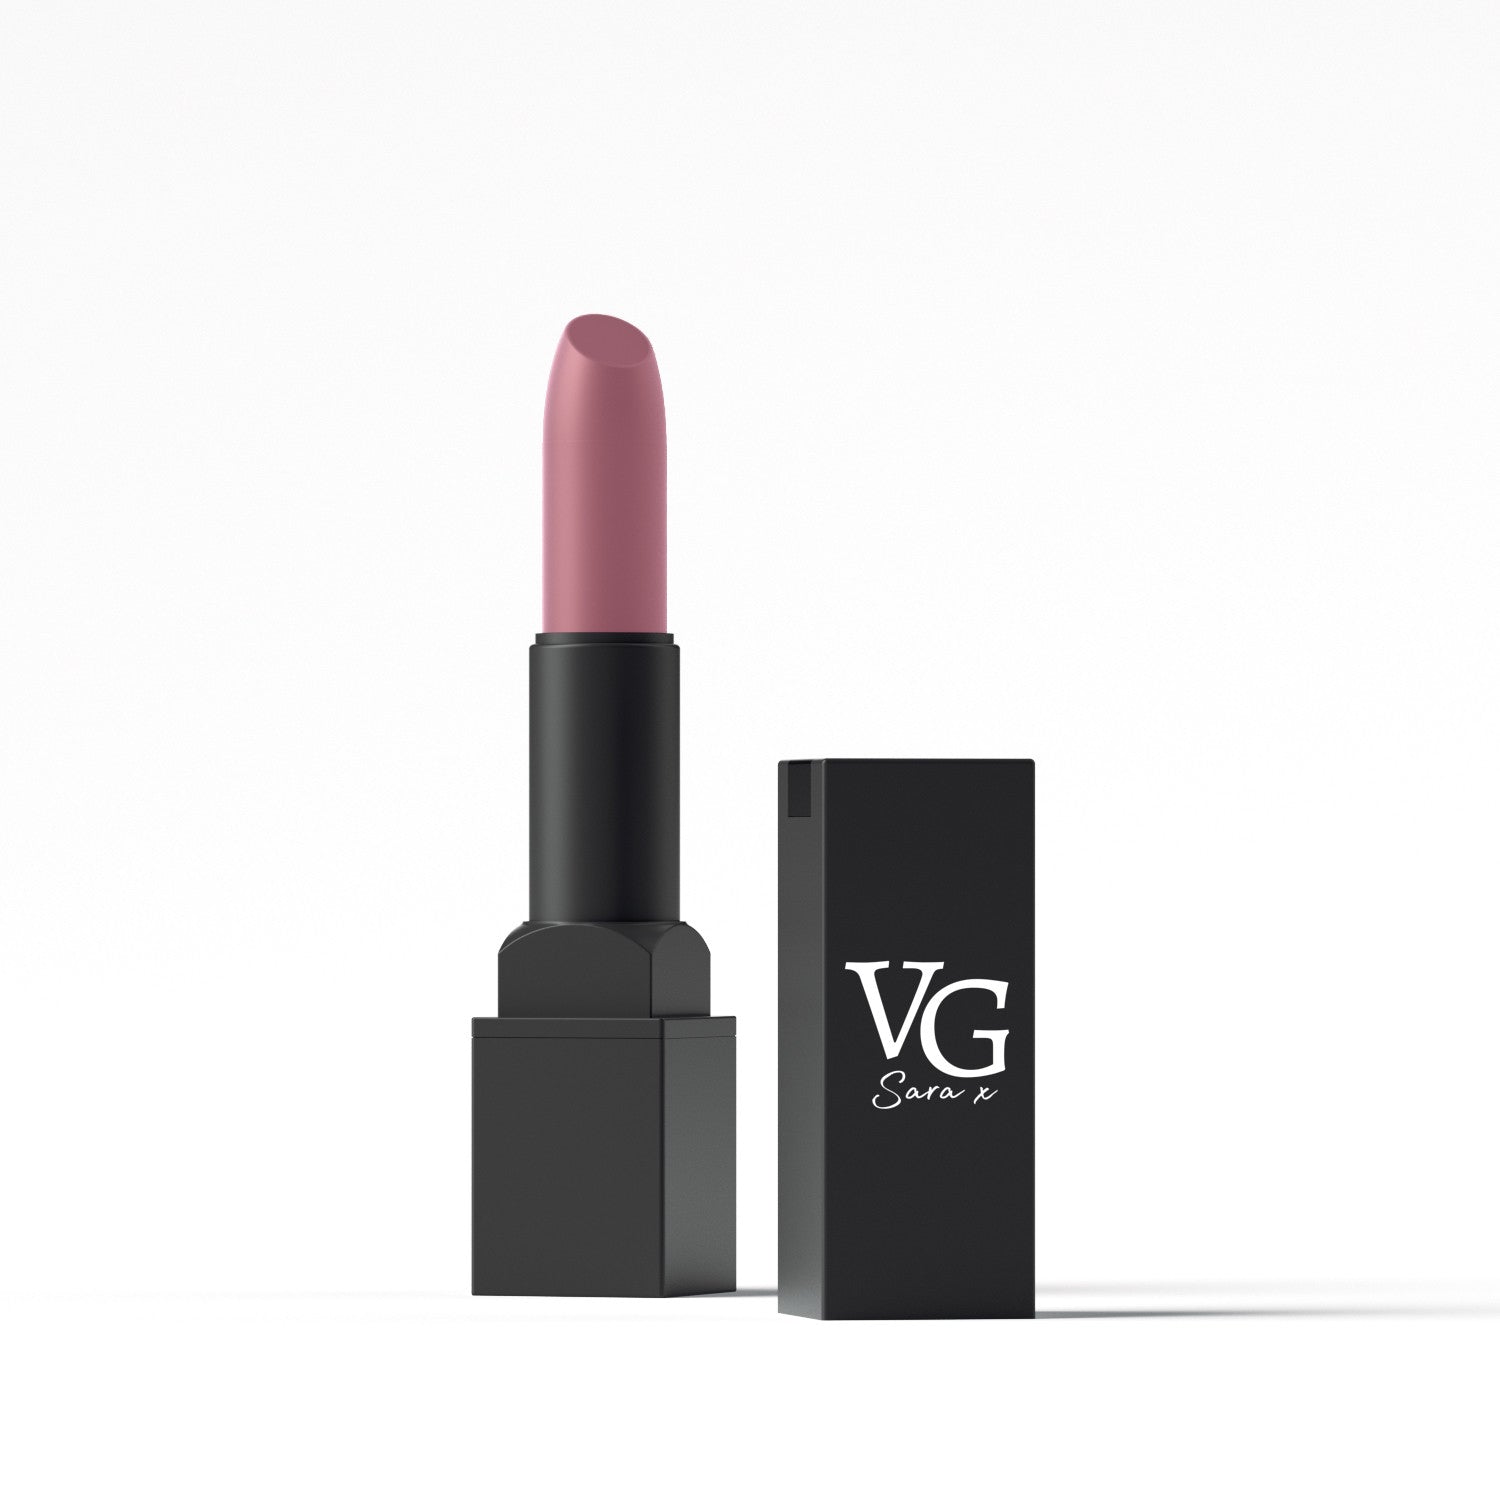 Detailed view of Vitamin E Enriched Naturally Long-Lasting Lipstick featuring VG logo